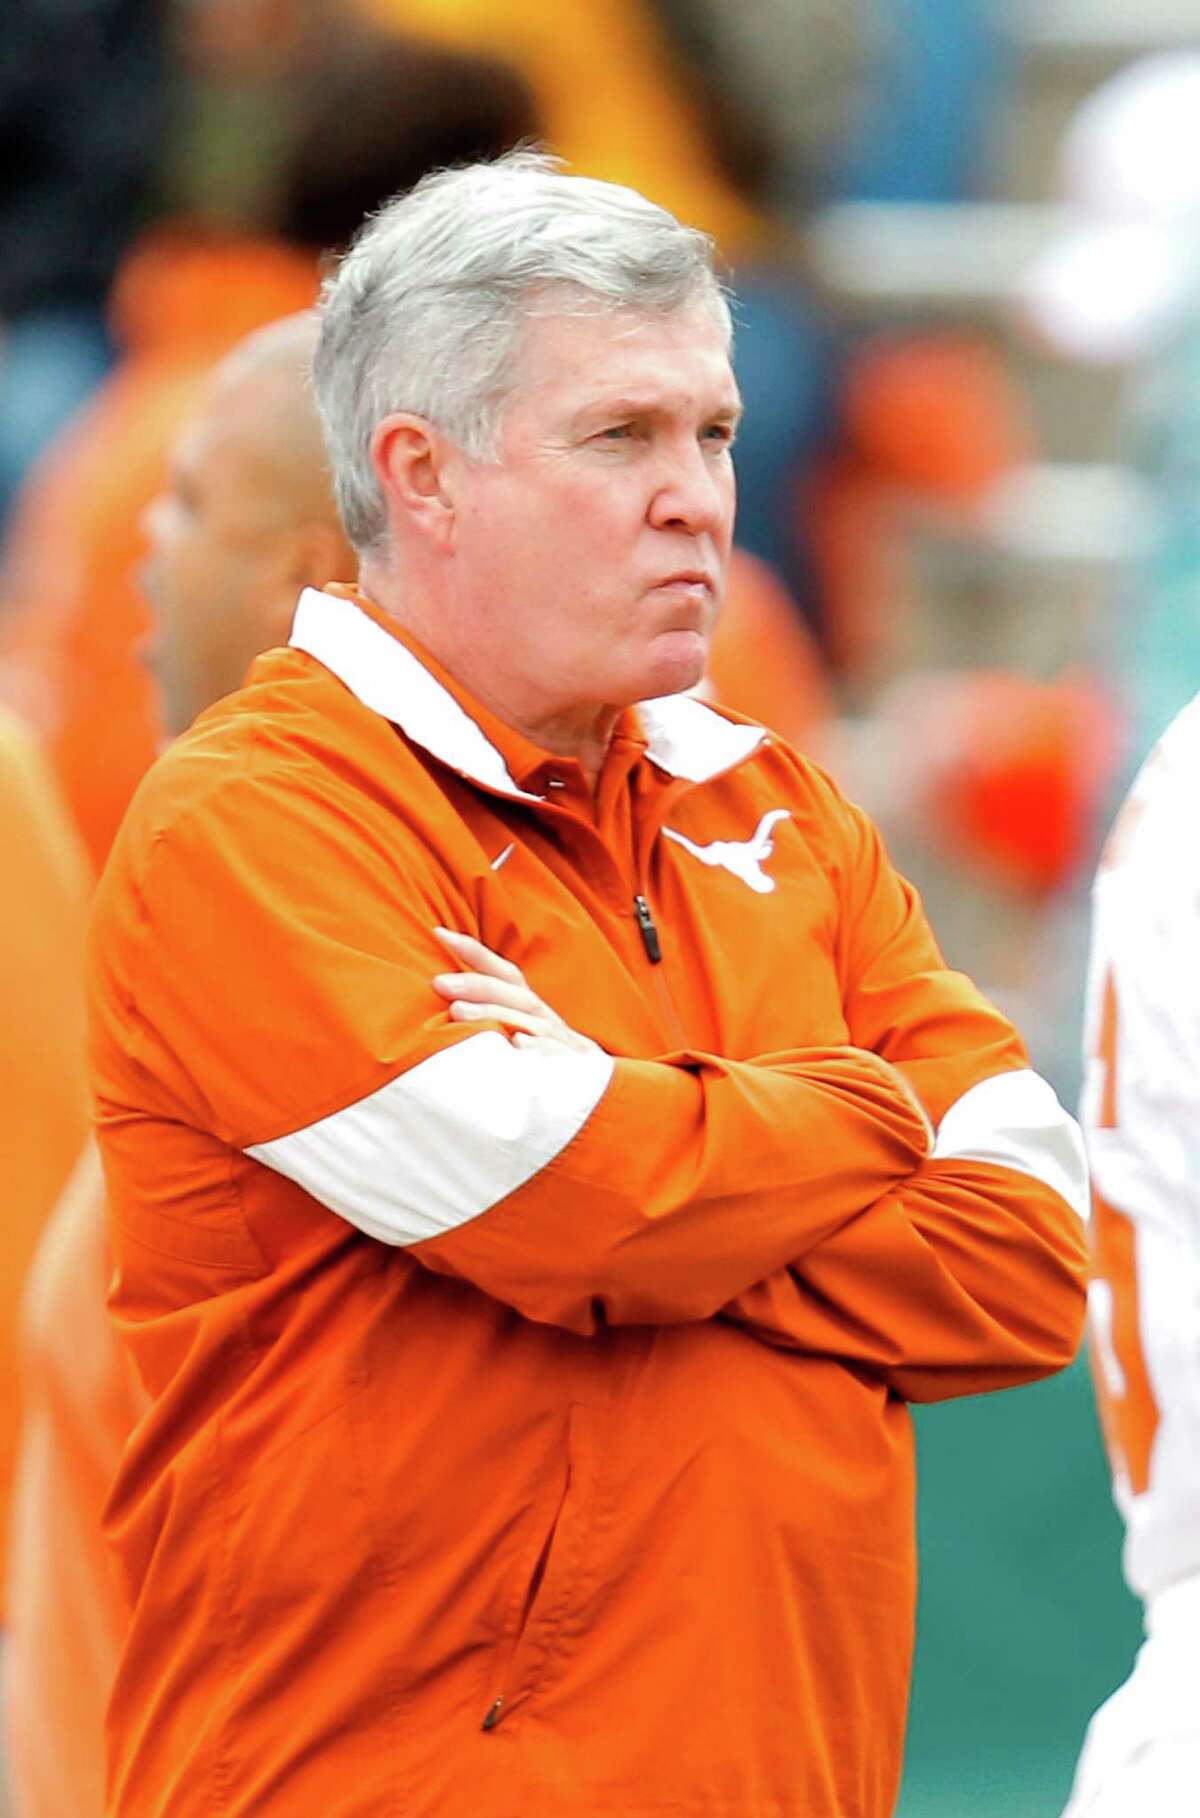 WACO, TX - DECEMBER 03: Coach Mack Brown of the Texas Longhorns looks on during a game against the Baylor Bears at Floyd Casey Stadium on December 3, 2011 in Waco, Texas. (Photo by Sarah Glenn/Getty Images)